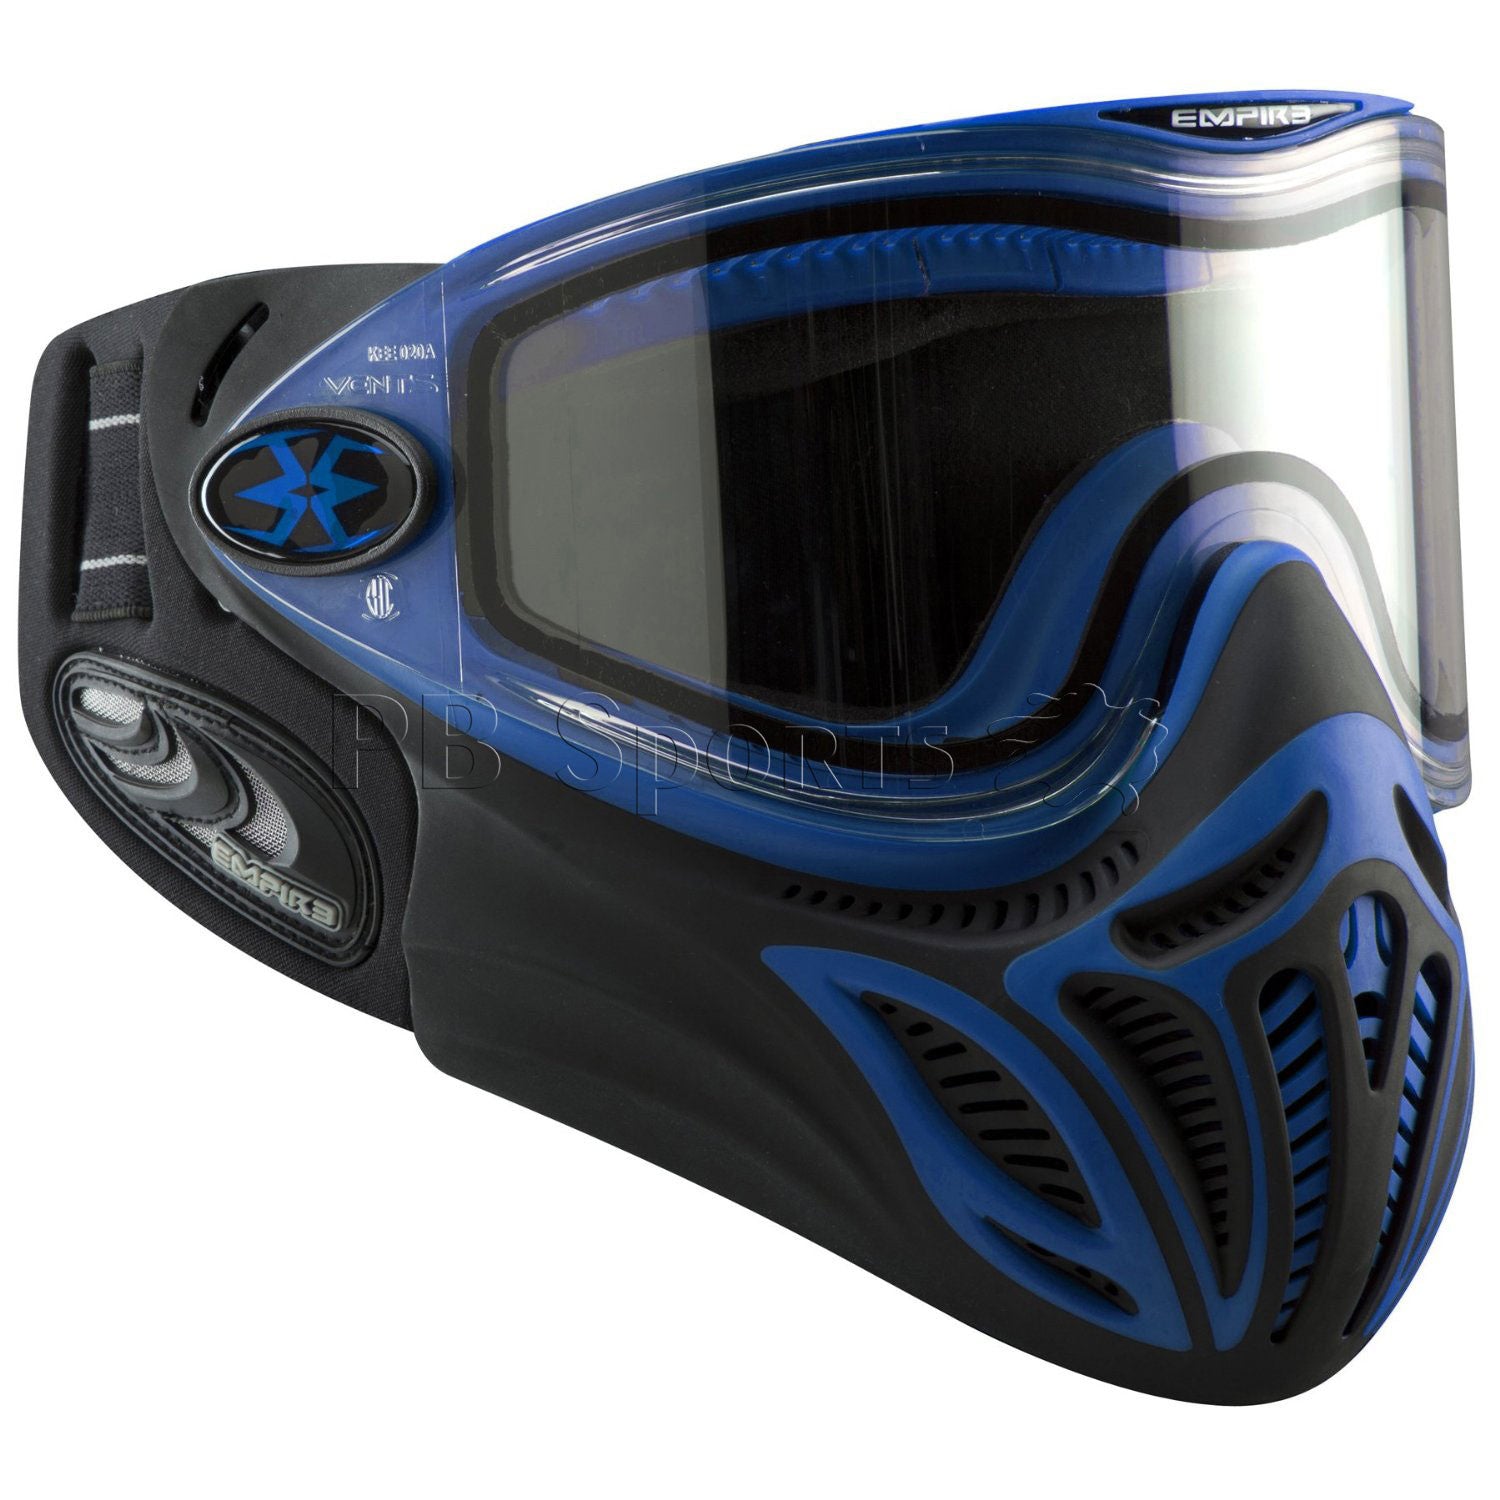 Empire Event Thermal Goggle System - Blue - Empire